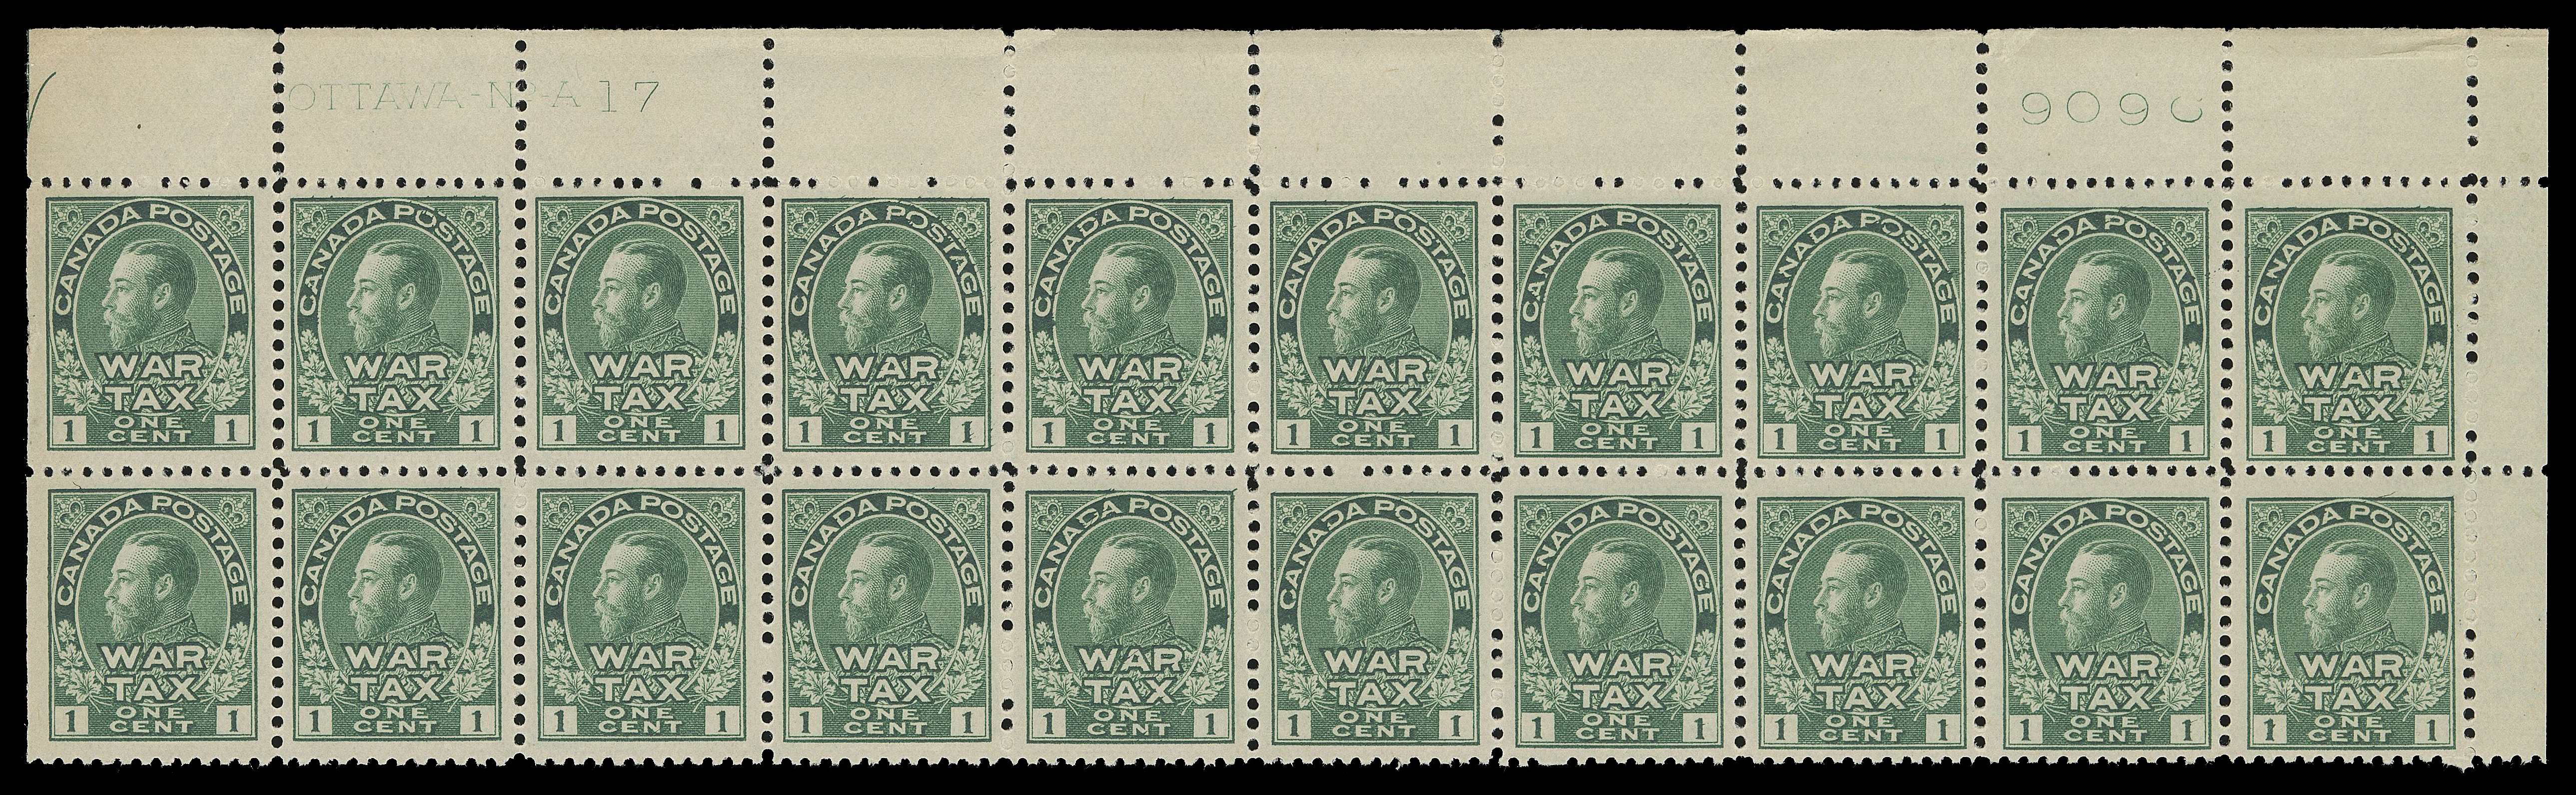 ADMIRAL STAMPS  MR1,Upper right Plate 17 block of twenty, printing order number "909C" at right, bright shade, minor perf separation and faint edge wrinkling in selvedge only, nicely centered, VF NH (Unitrade cat. $2,400)